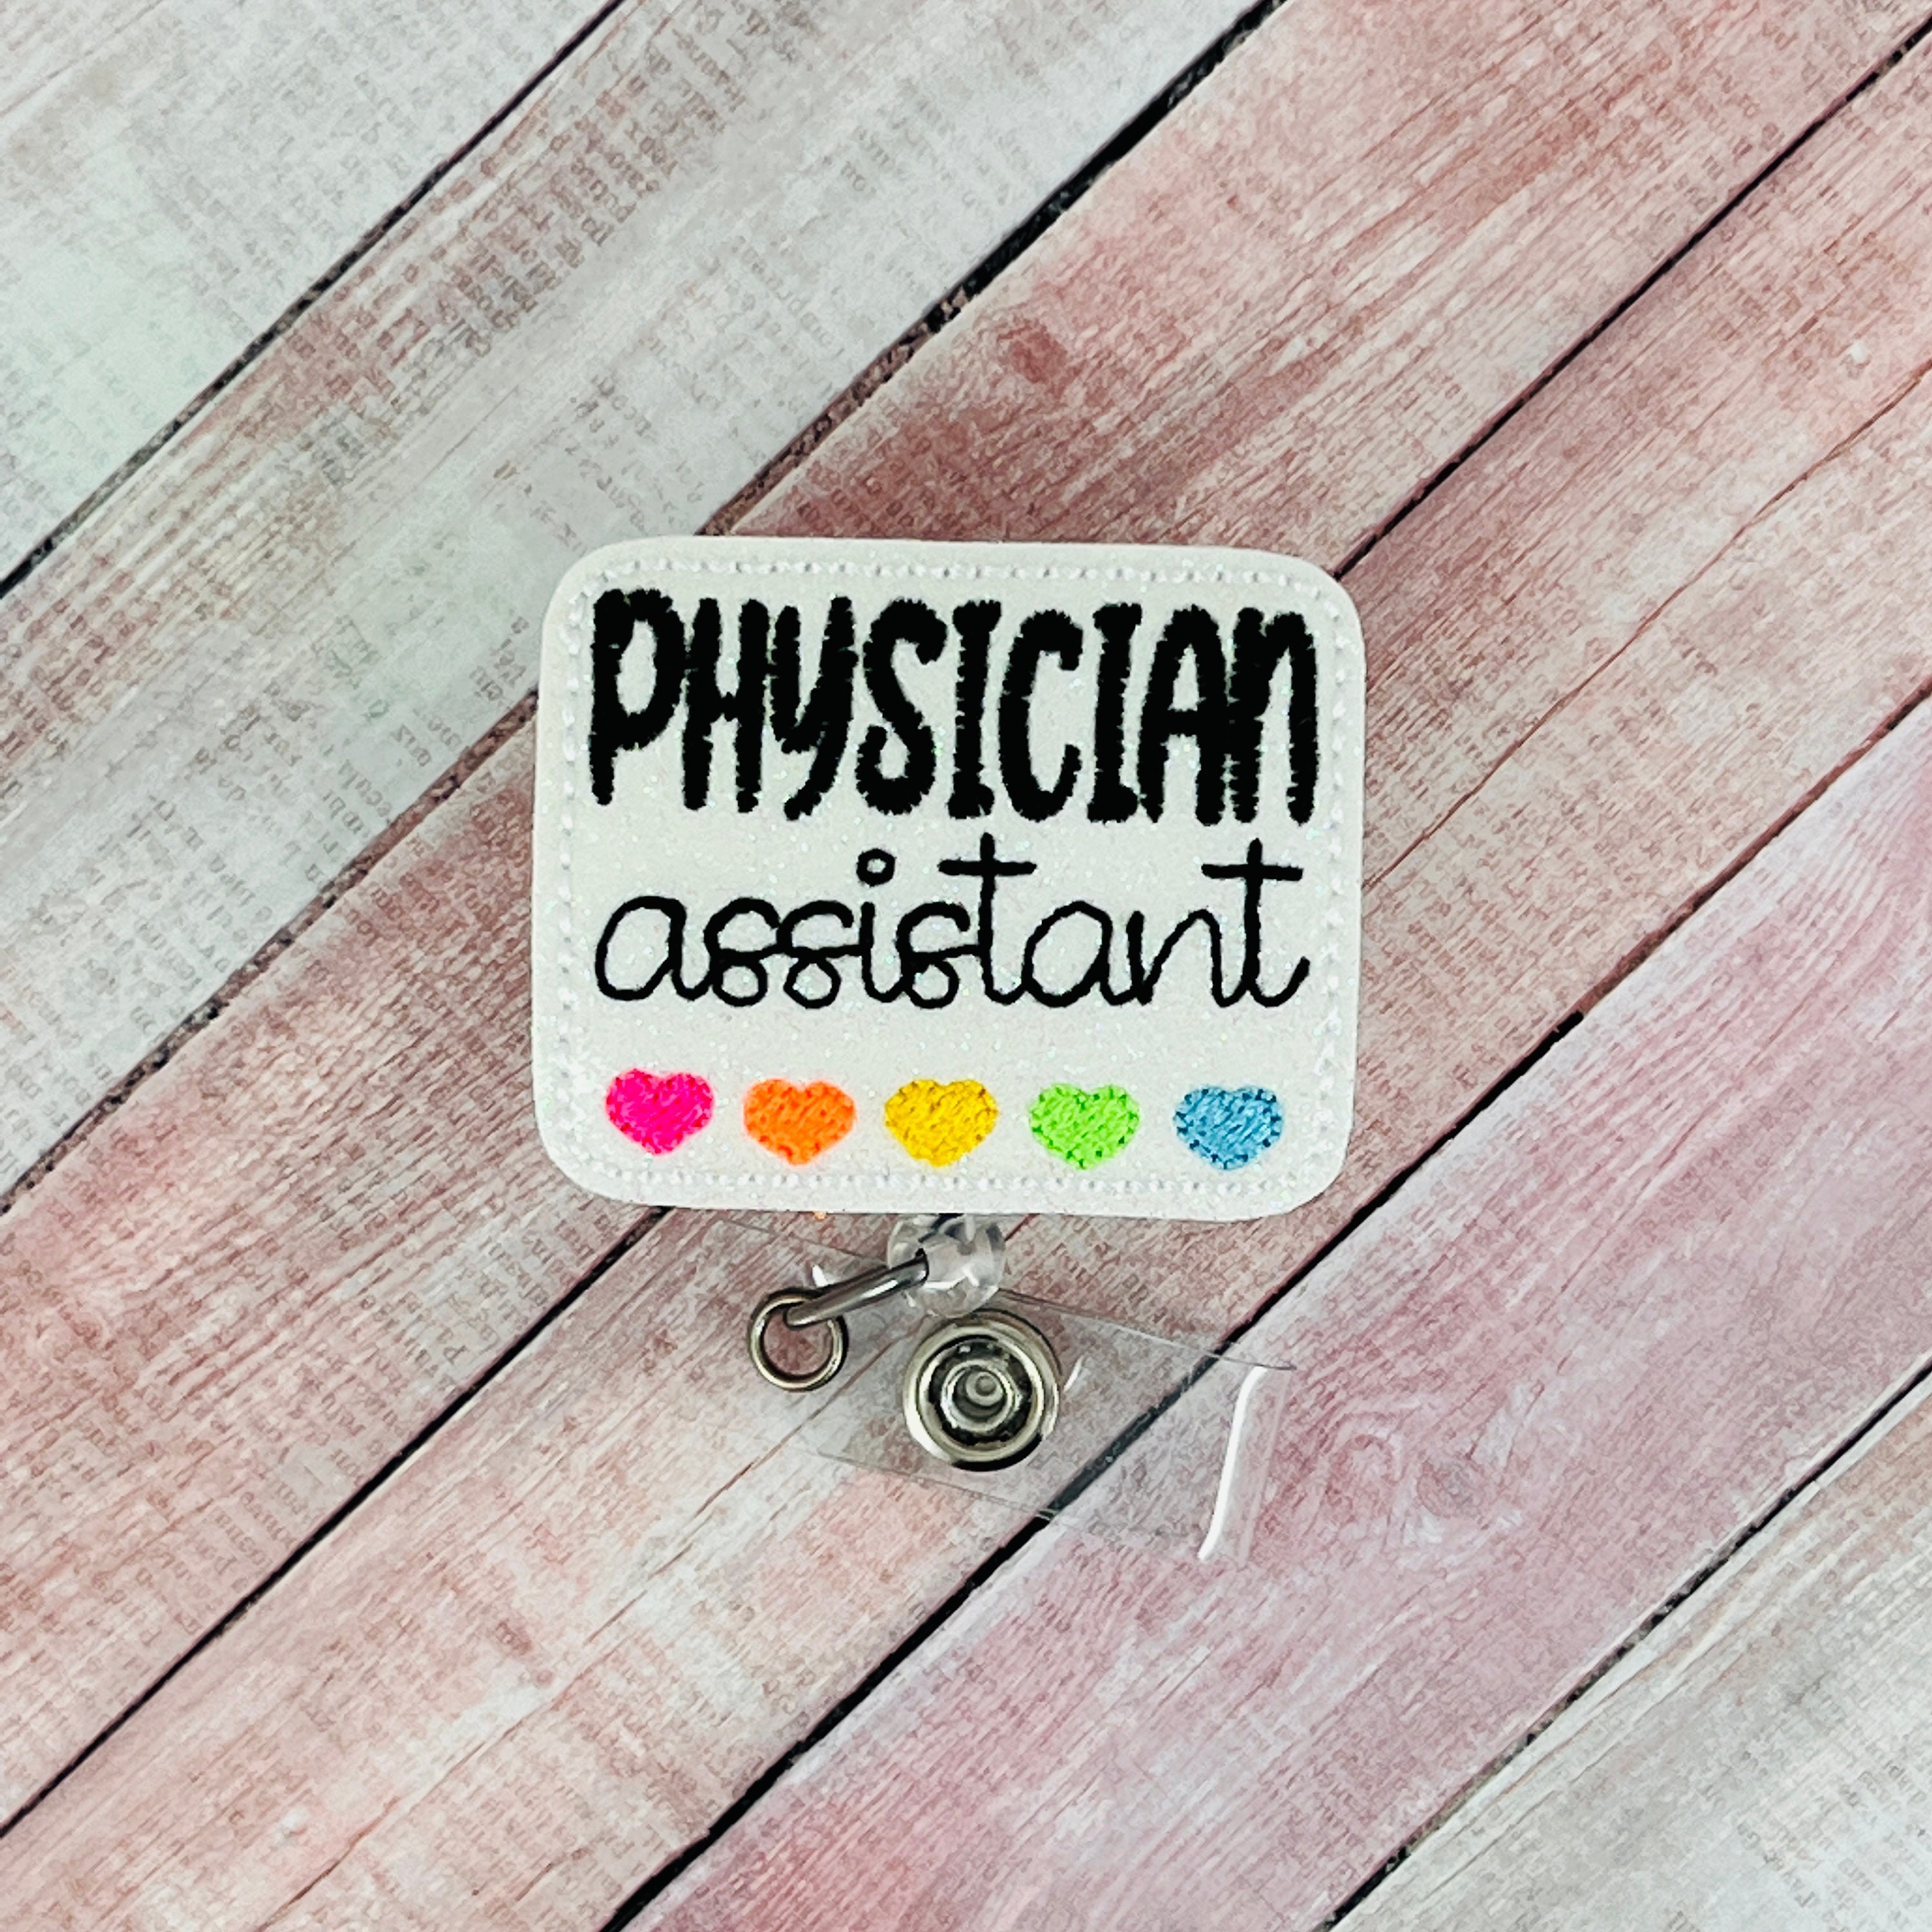 PA Badge Reel, Physician Assistant Badge Holder, Retractable ID Badge Holder,  Nurse Badge Reel, Medical Badge Reel, Gifts for PA, Name Tag -  Canada